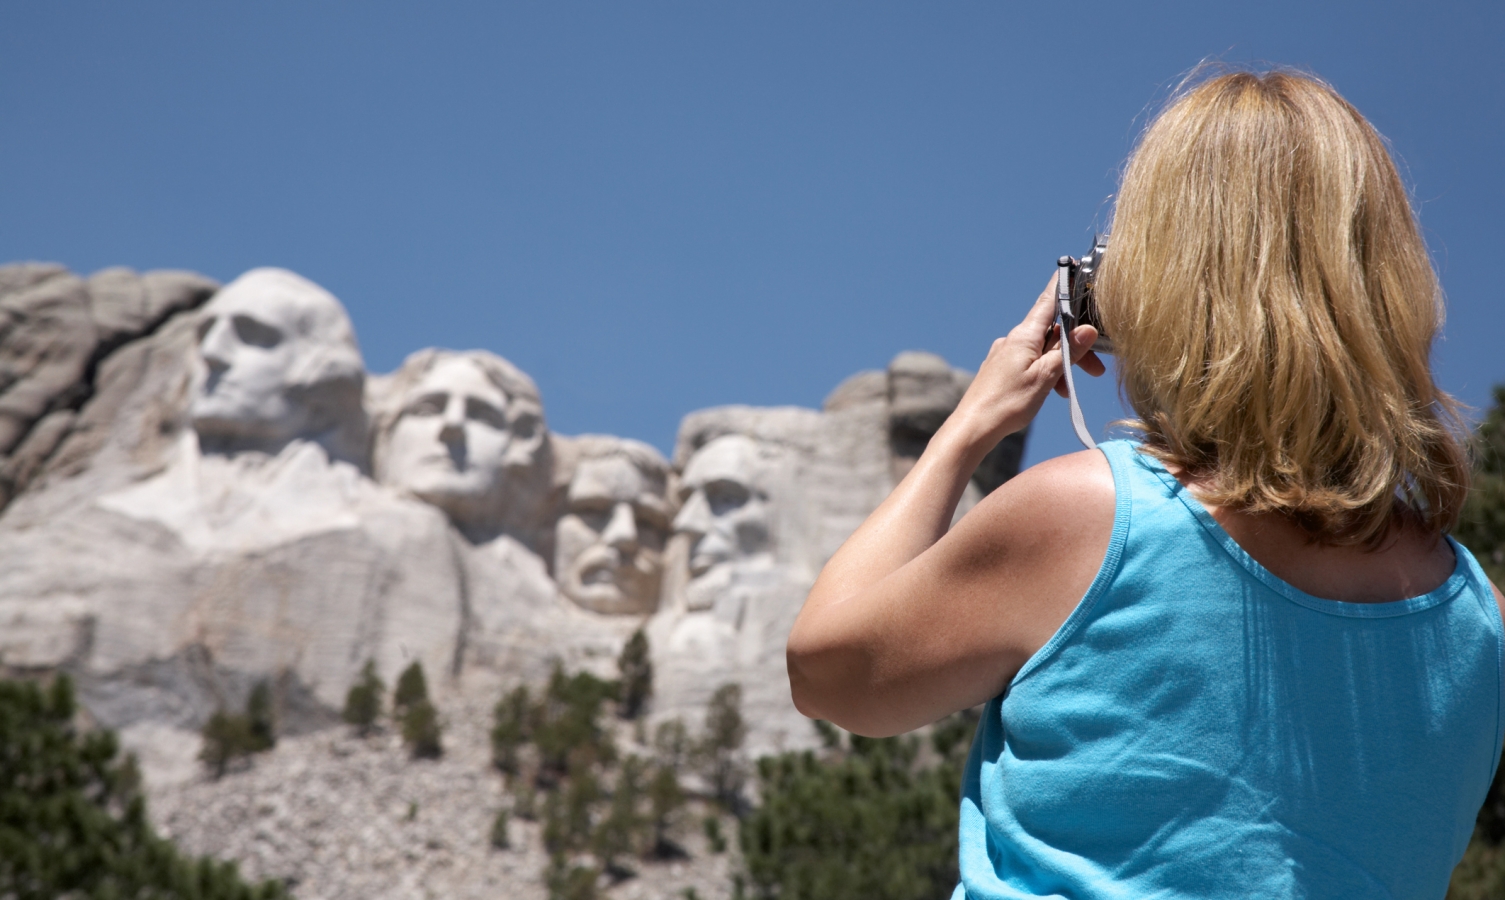 Woman takes a snapshot of Mt. Rushmore while on a summer vacation